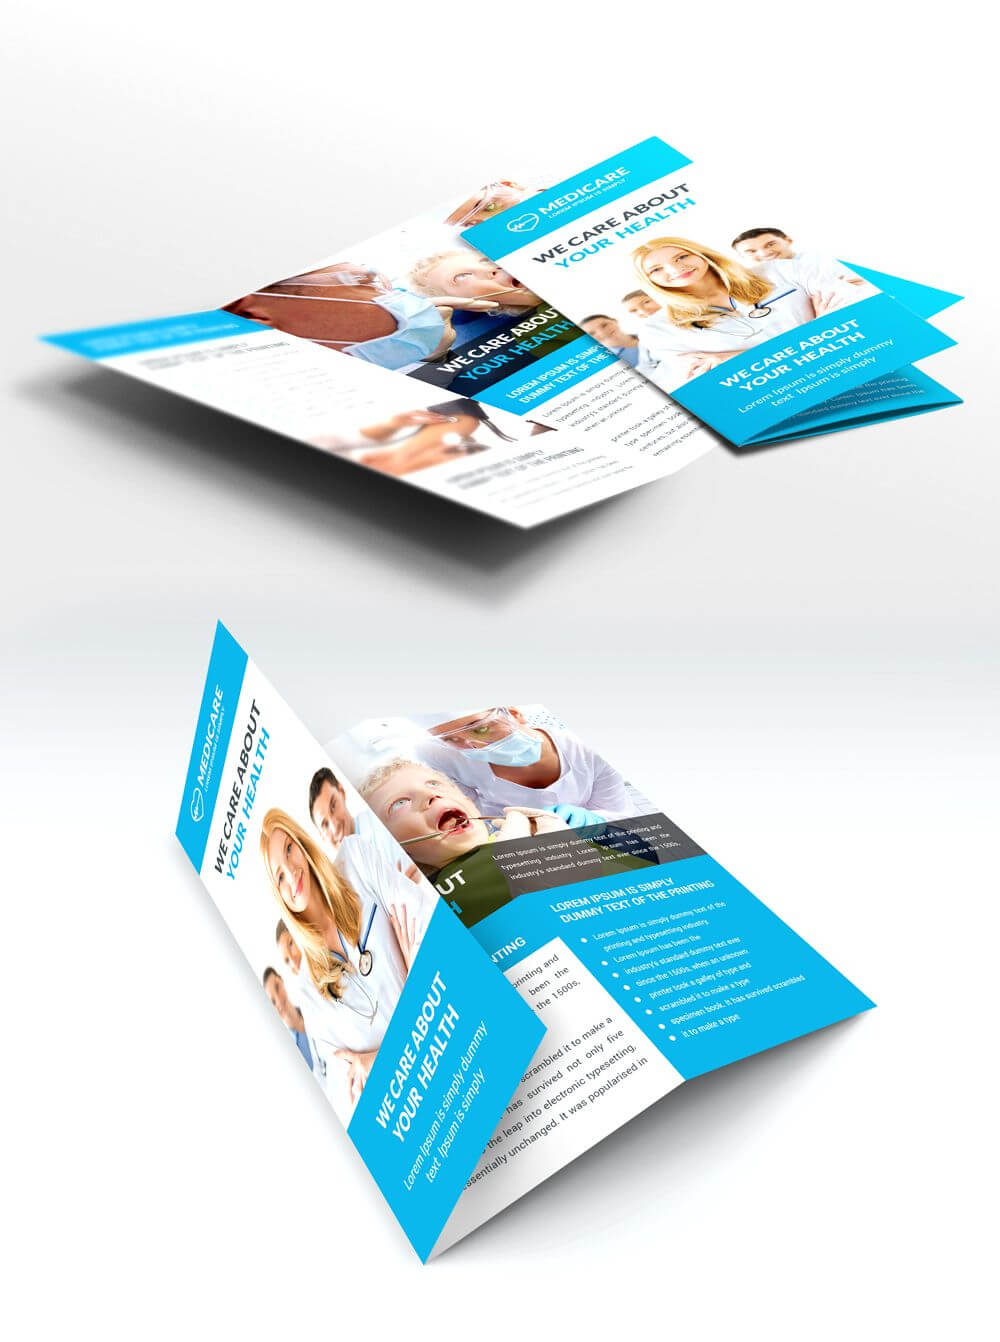 Medical Care And Hospital Trifold Brochure Template Free Psd Intended For Healthcare Brochure Templates Free Download